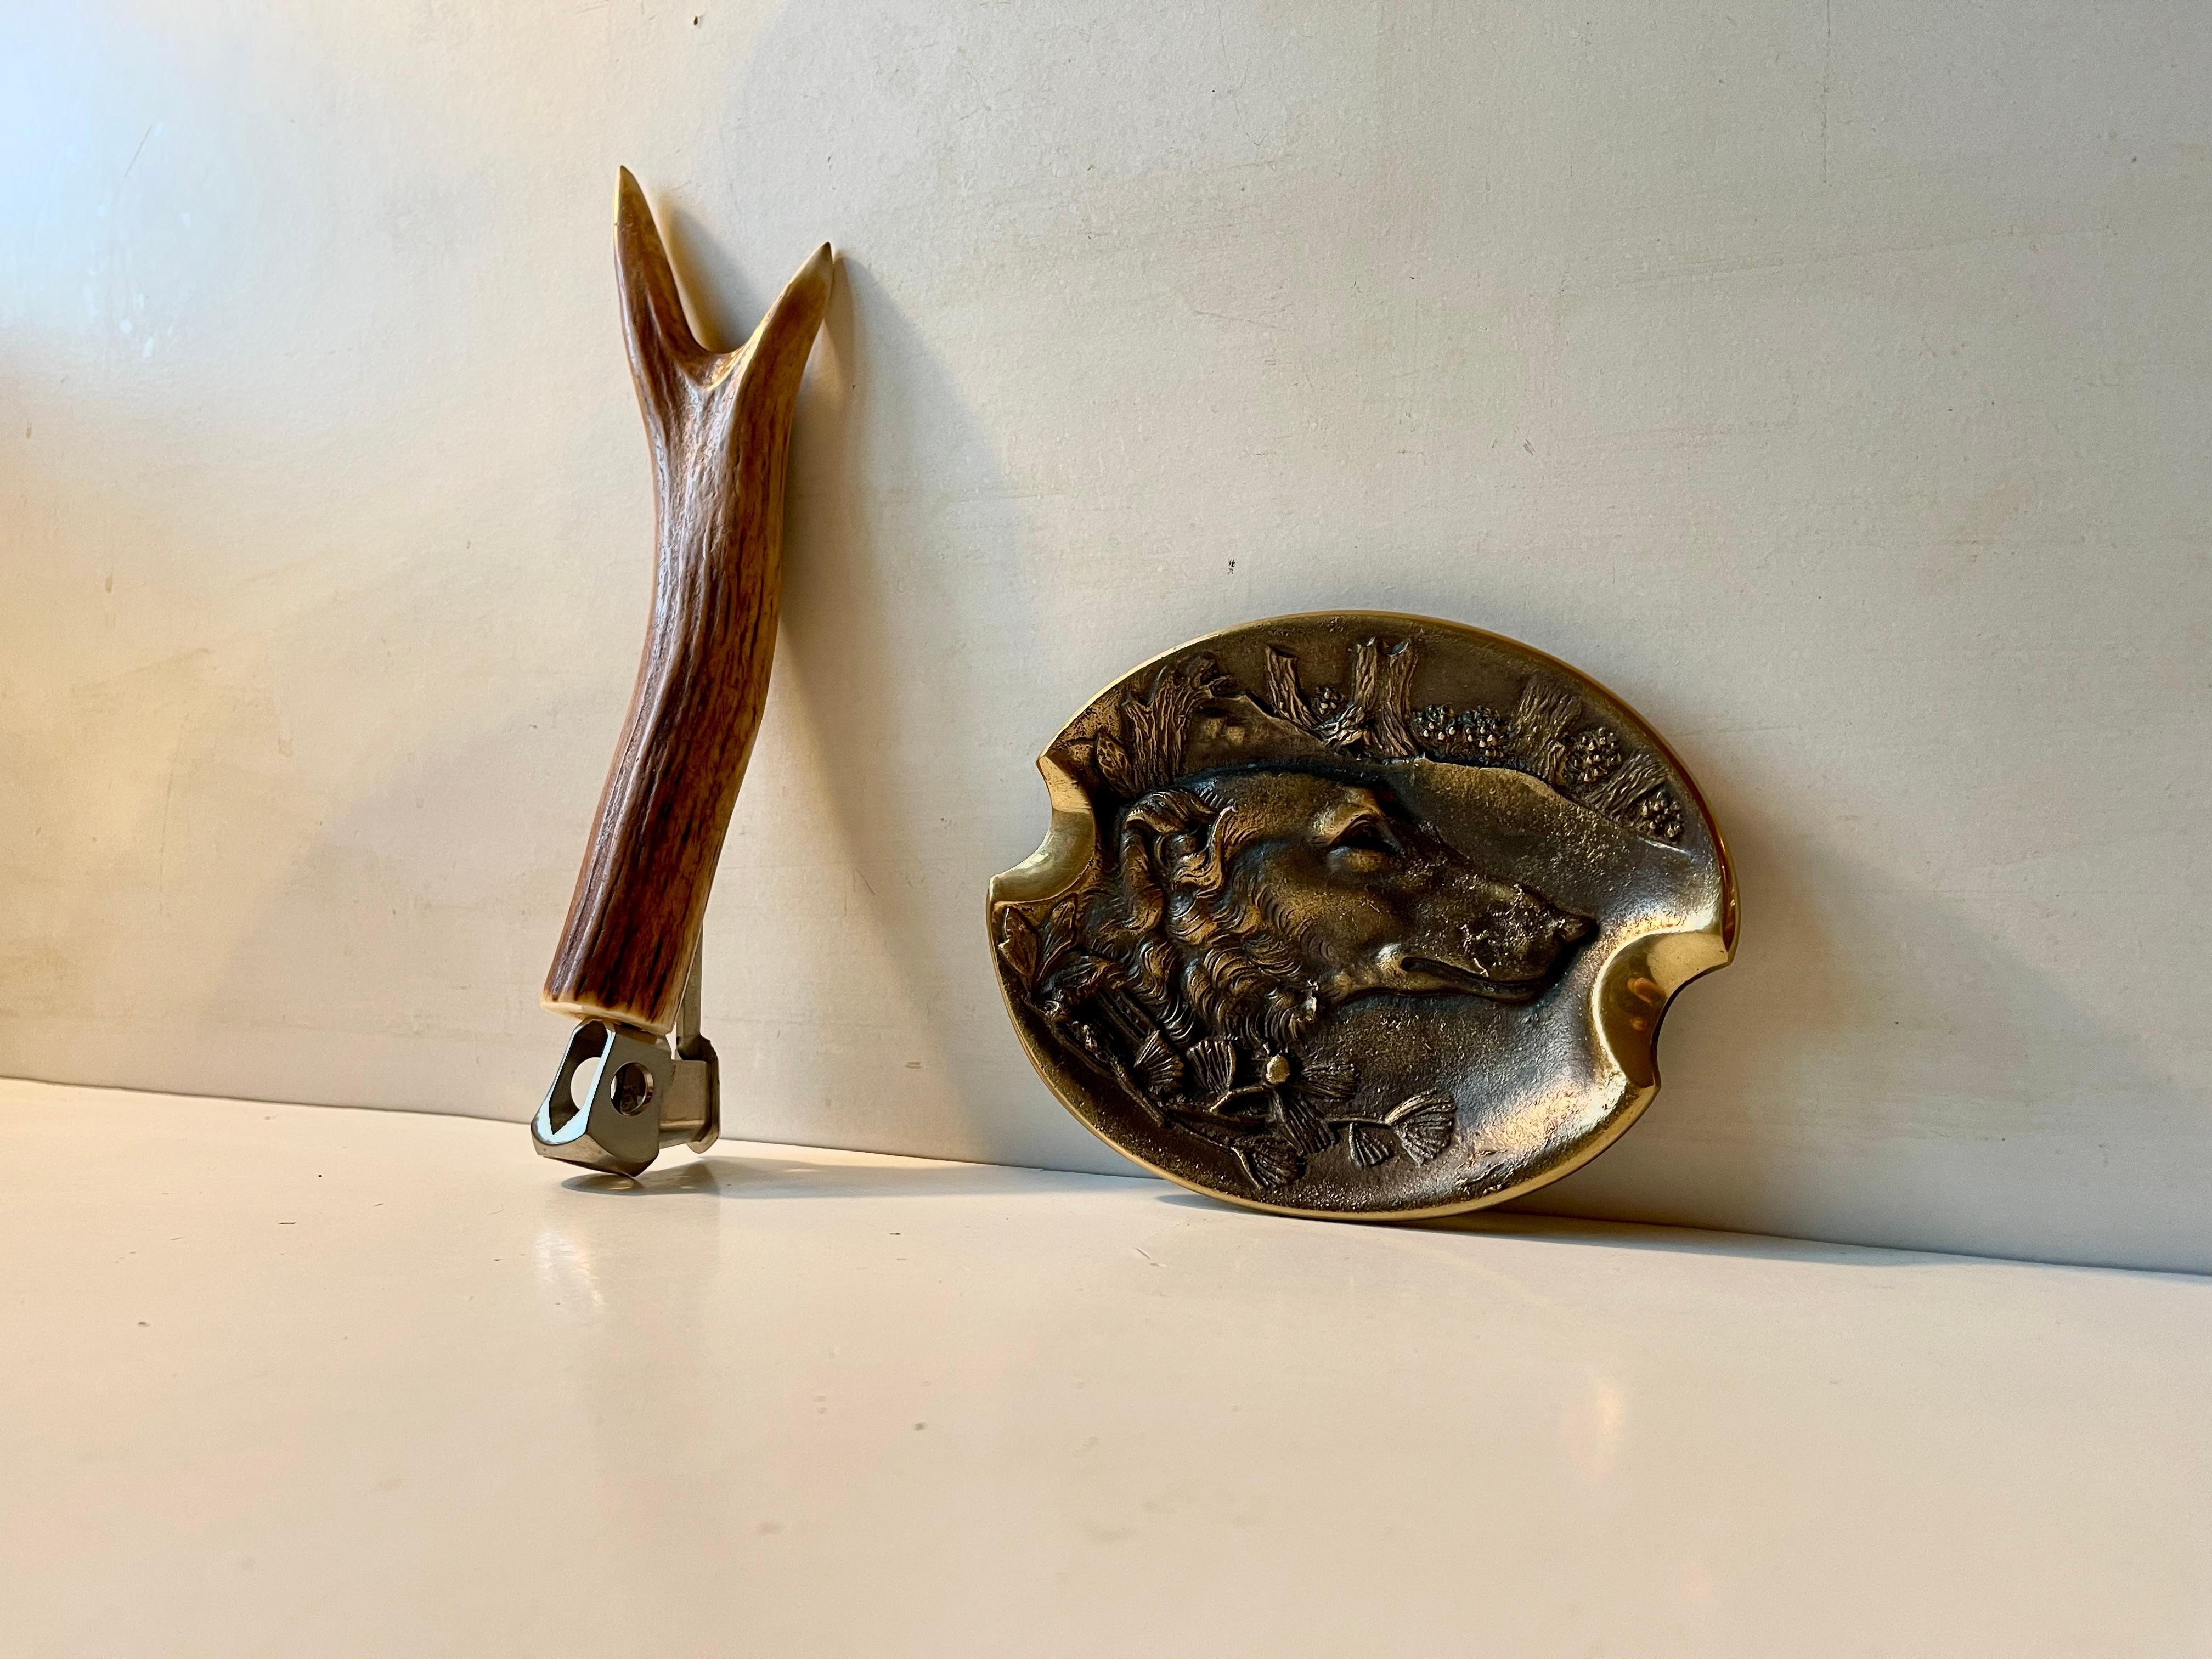 XL stag handled cigar cutter from Sollingen Germany circa 1950-60. Its accompanied by a stylish German made brass cigar ashtray with two large sleves and a motif of a hunting dog. Measurements: L: 24 cm, H: 4.5 cm (cigar cutter), the ashtray